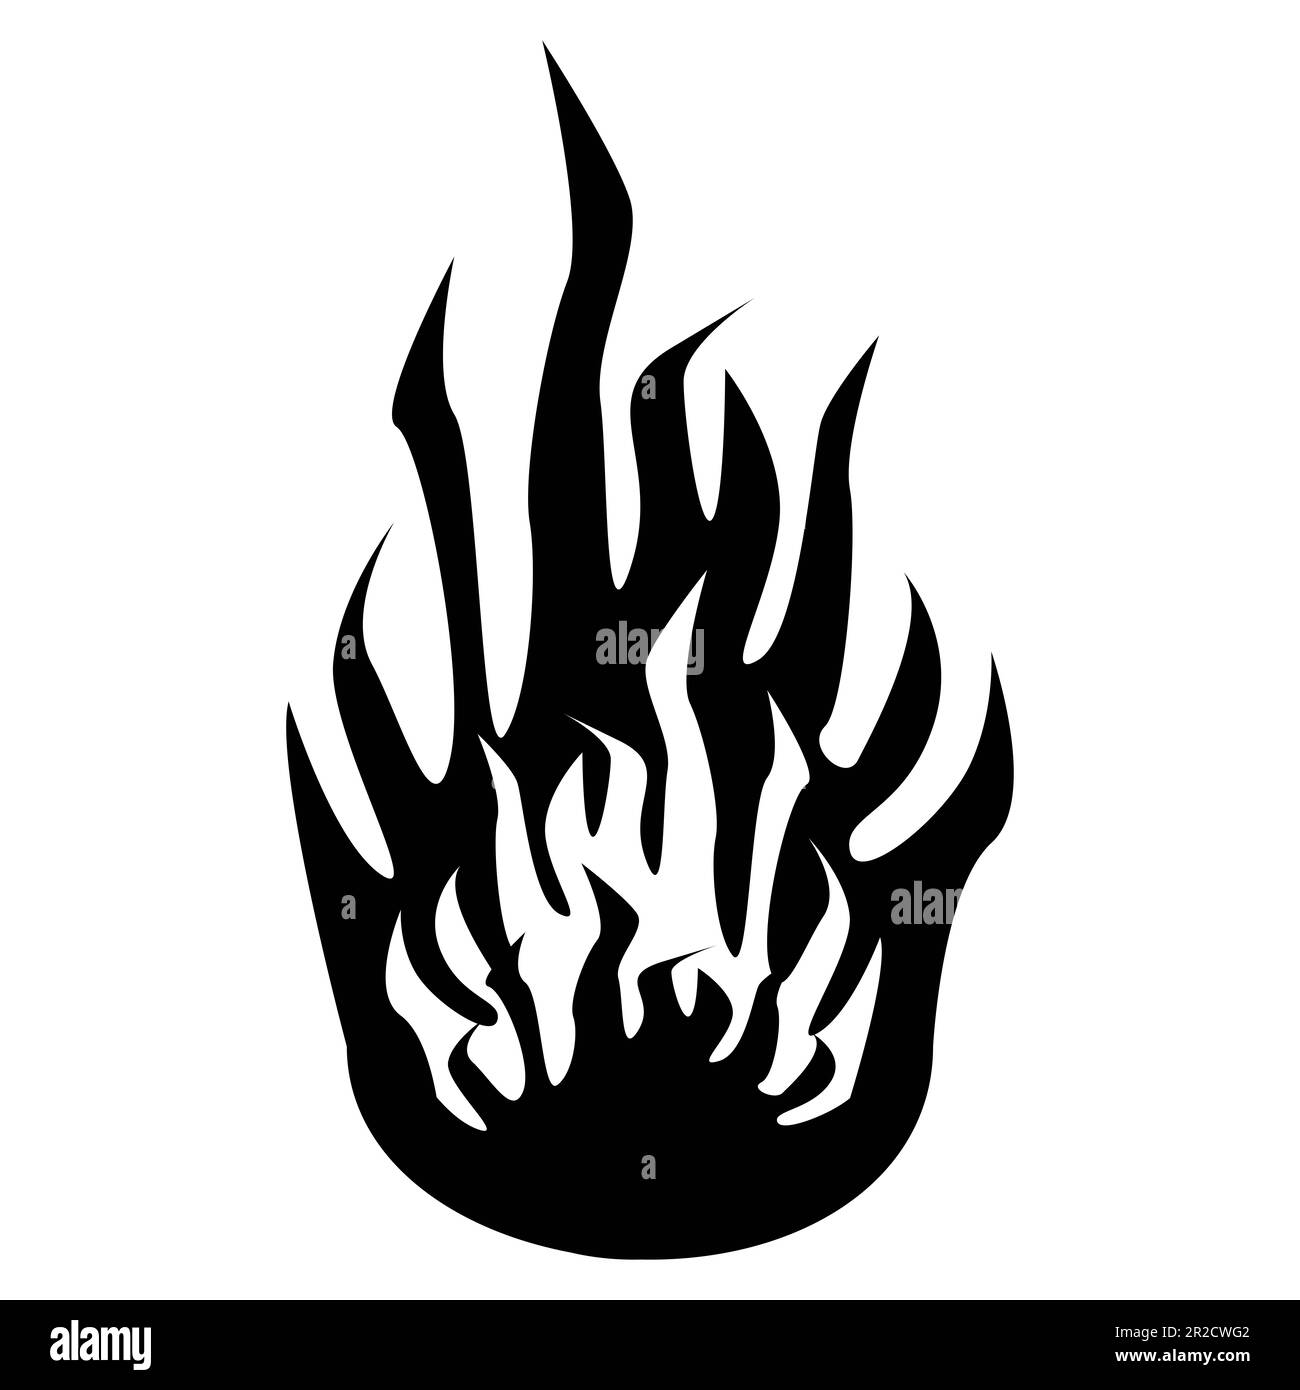 Flame silhouette. Burning elements. Fire sign. Illustration on a white background. Stock Photo